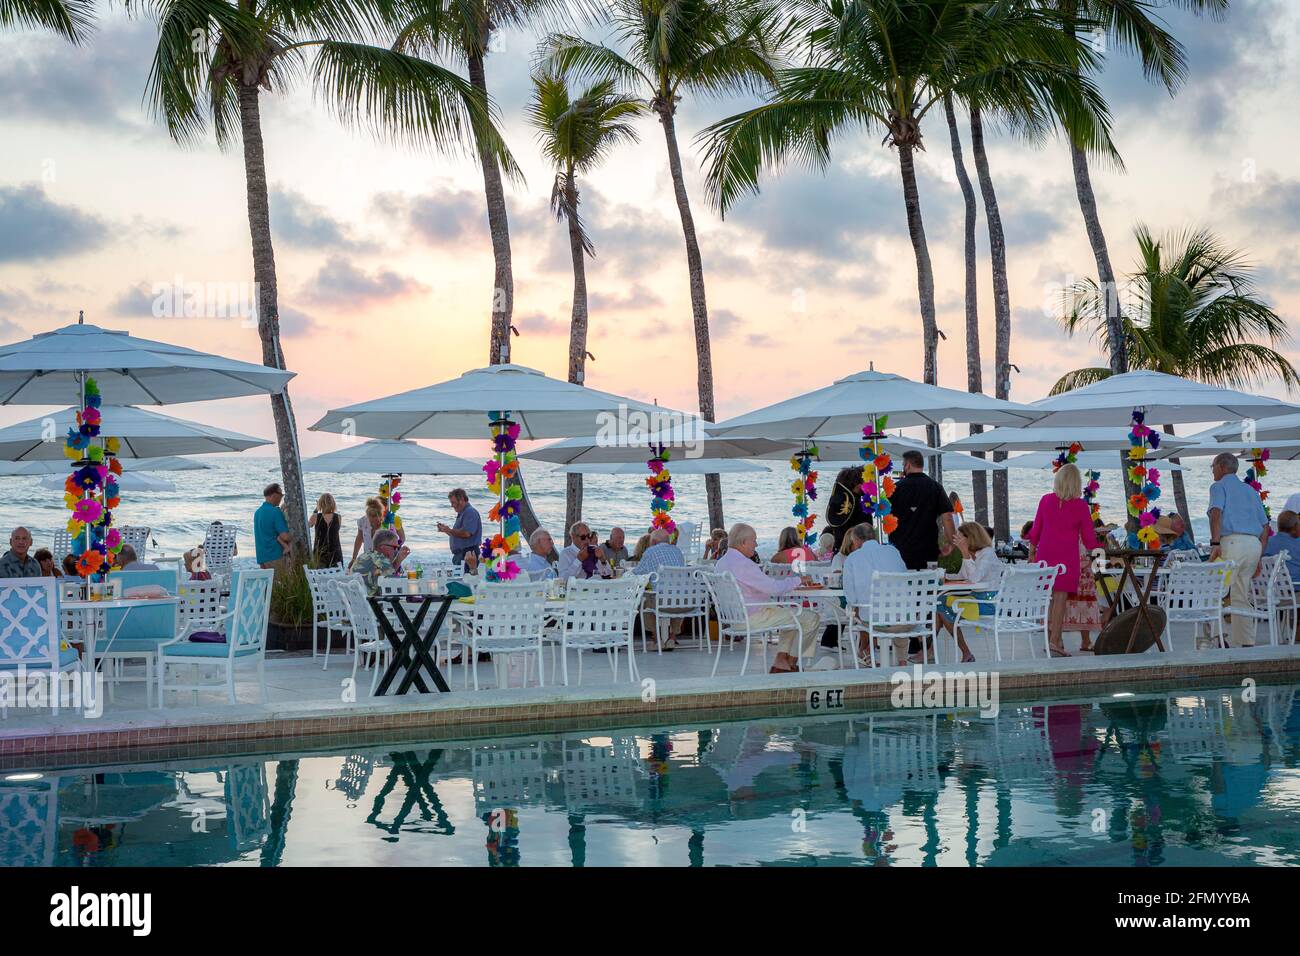 Seating and umbrellas set up at the beach for a dinner party, Naples, Florida, USA Stock Photo